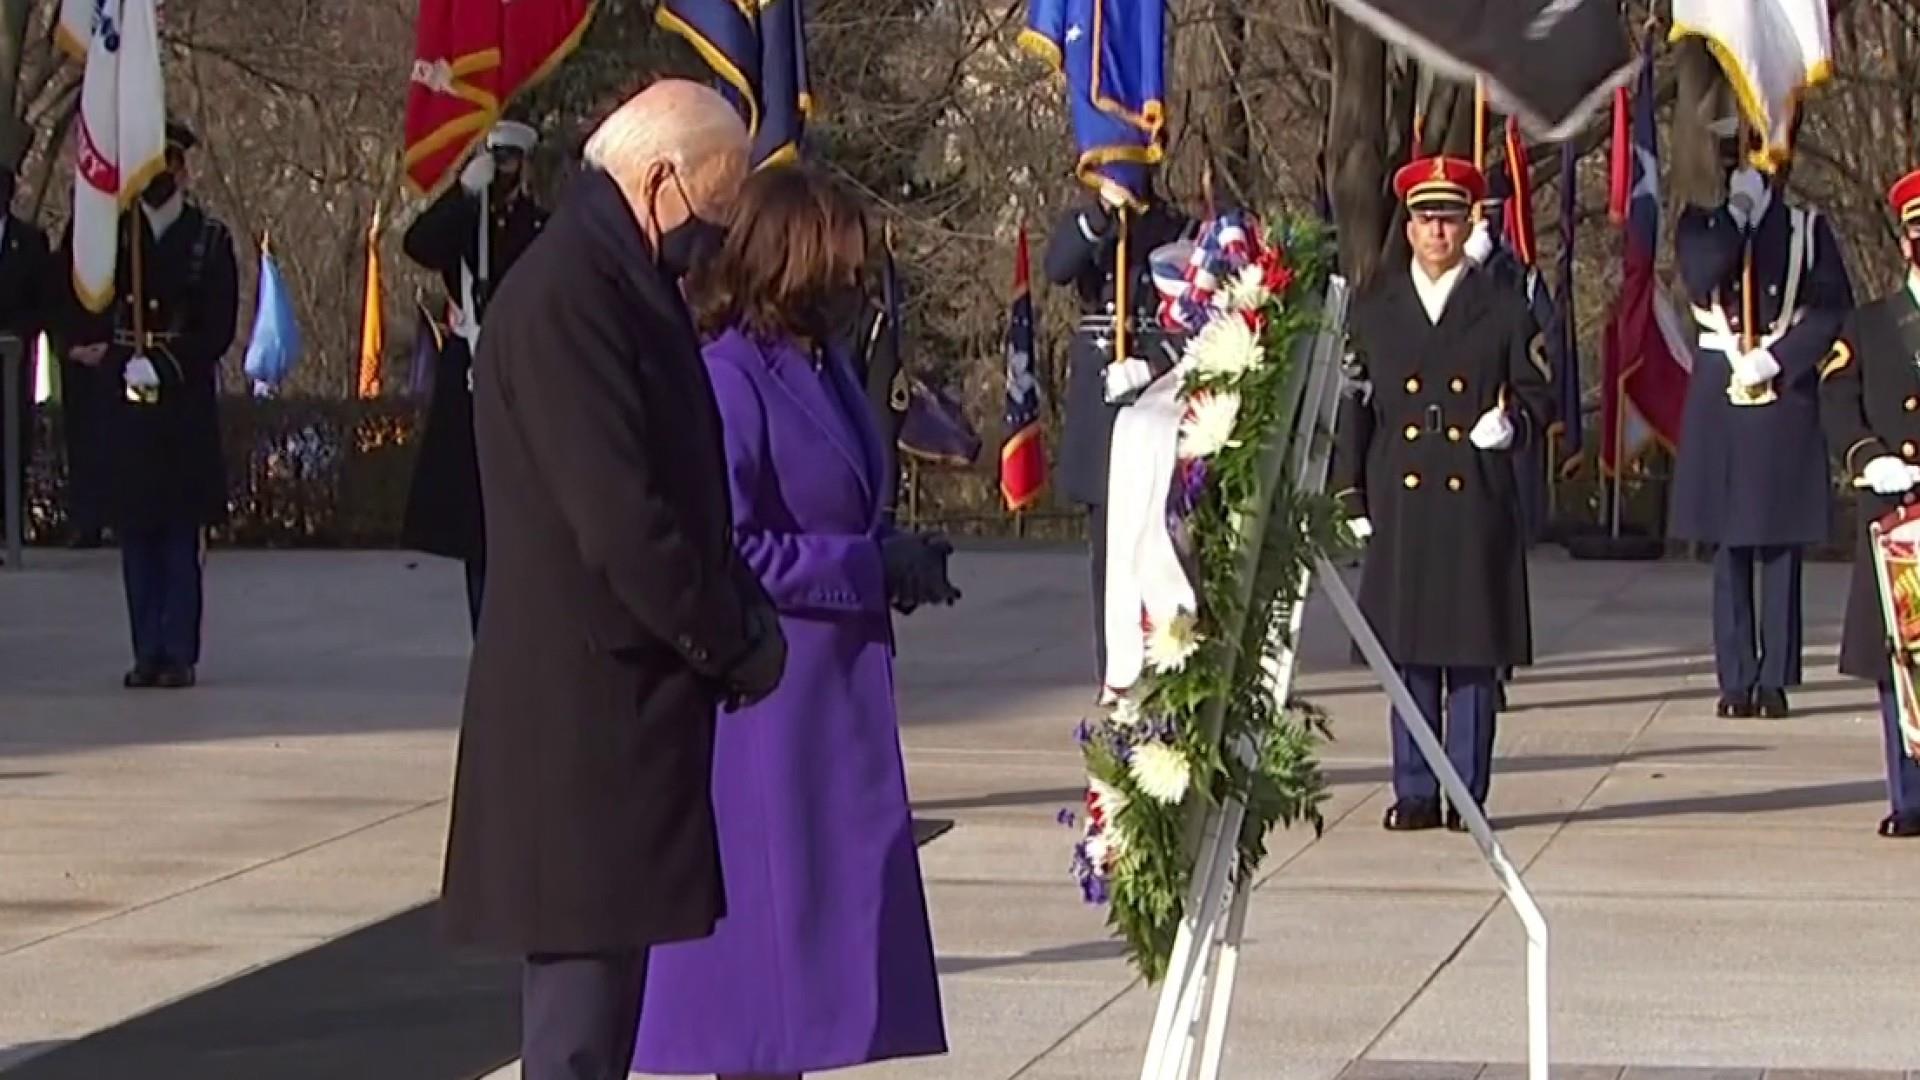 President Biden & VP Harris at the Tomb of the Unknown Soldier at Arlington National Cemetery